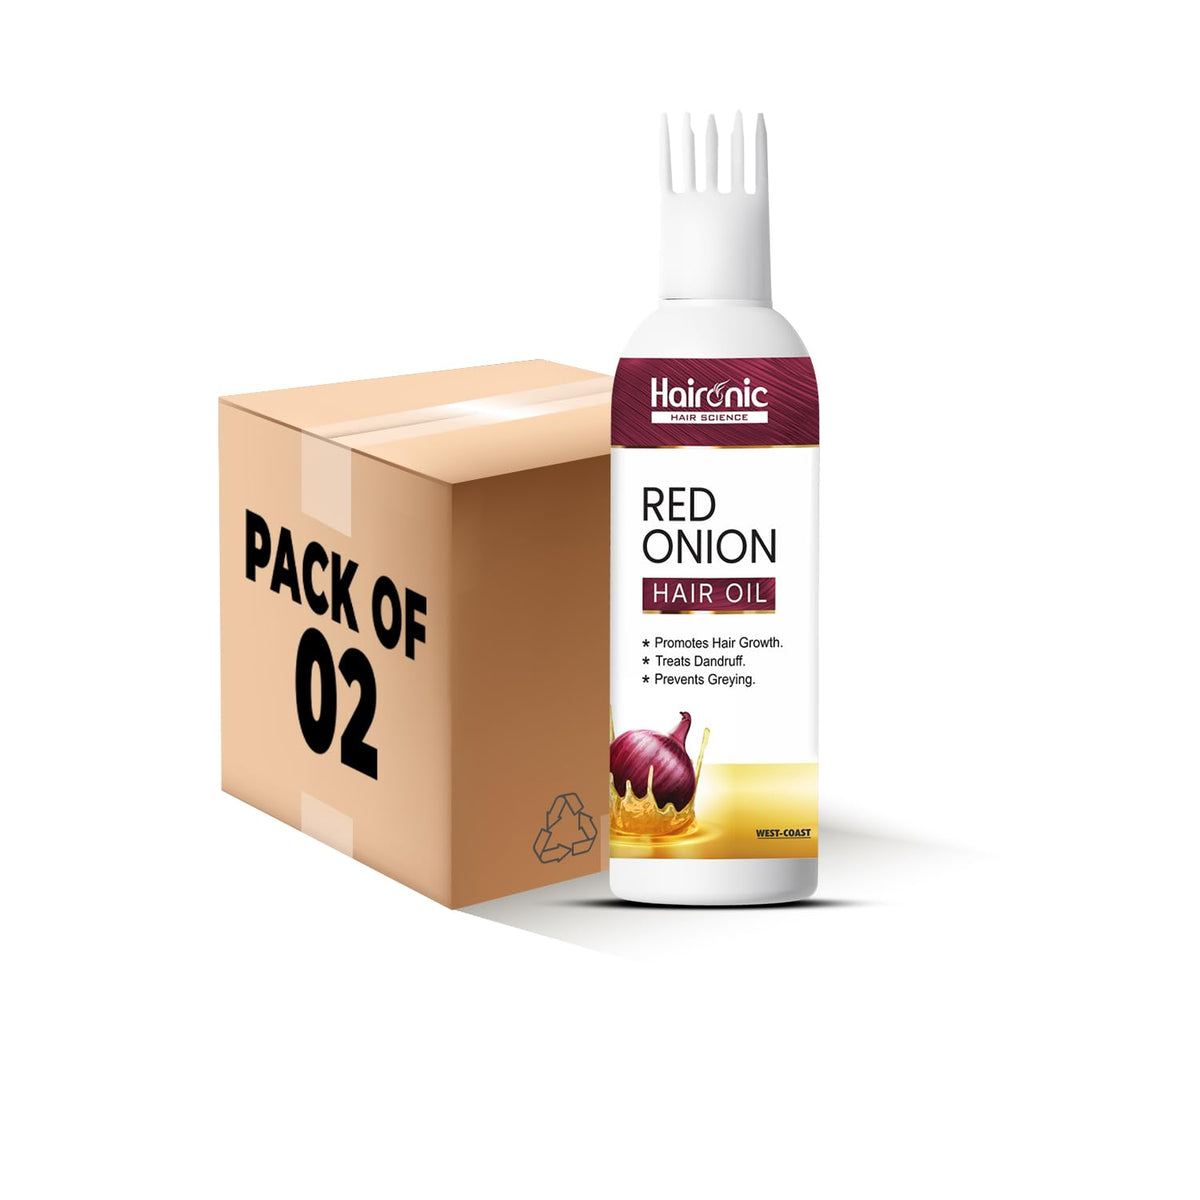 Haironic Hair Science Red Onion Oil- Anti Hair Loss, Nourishing Hair Treatment With Real Onion Extract - Intensive Hair Fall, Dandruff Control Hair Oil - 100ml (Pack of 2)